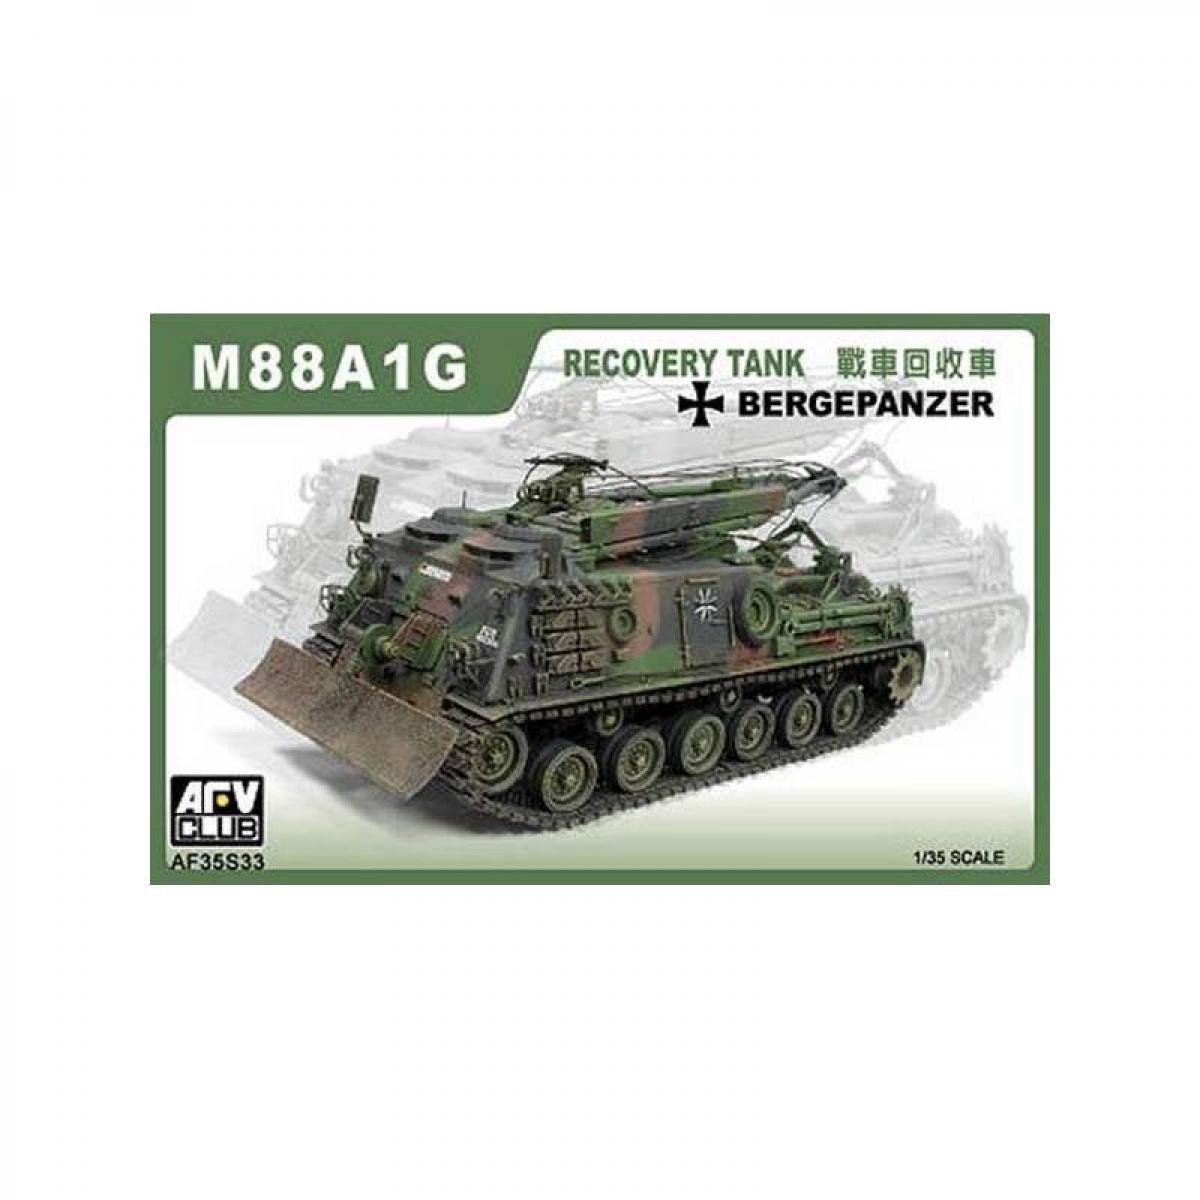 Afv Club - Maquette Véhicule M88a1g Bergepanzer Recovery Tank - Chars